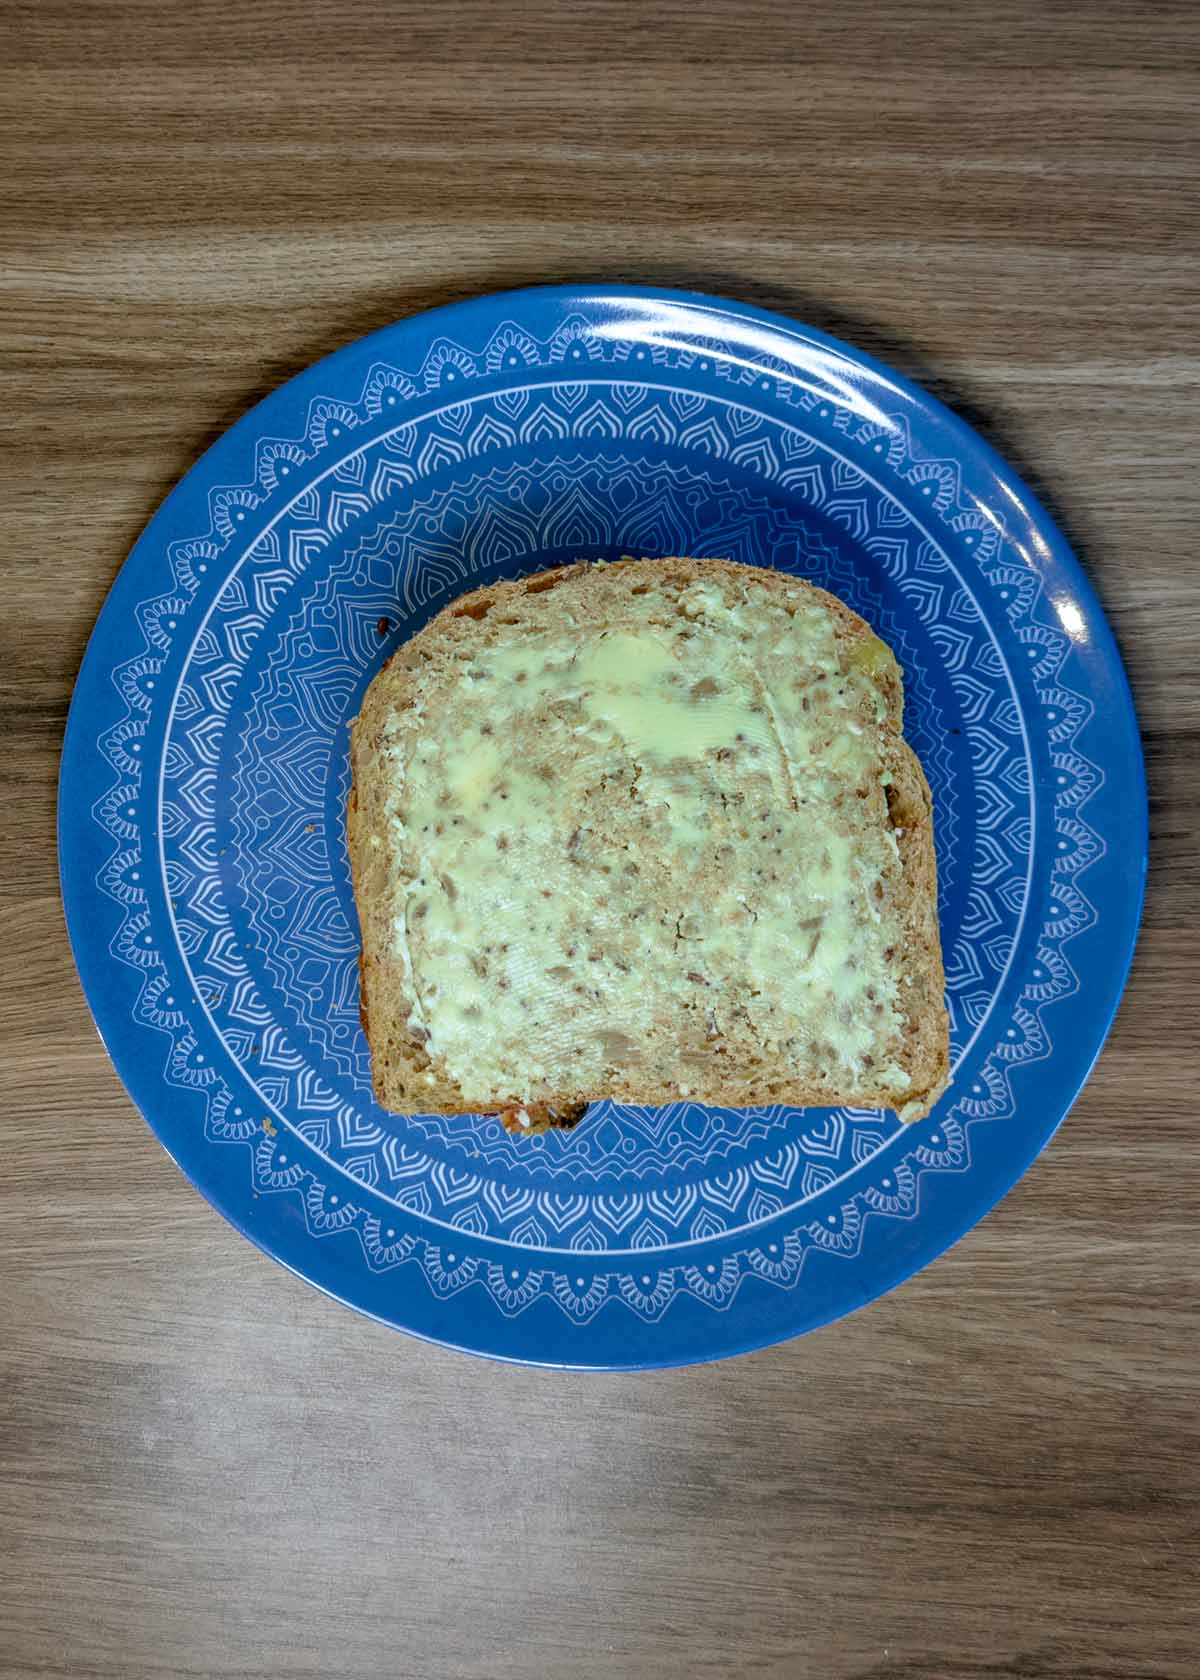 Another slice of buttered bread added on top.